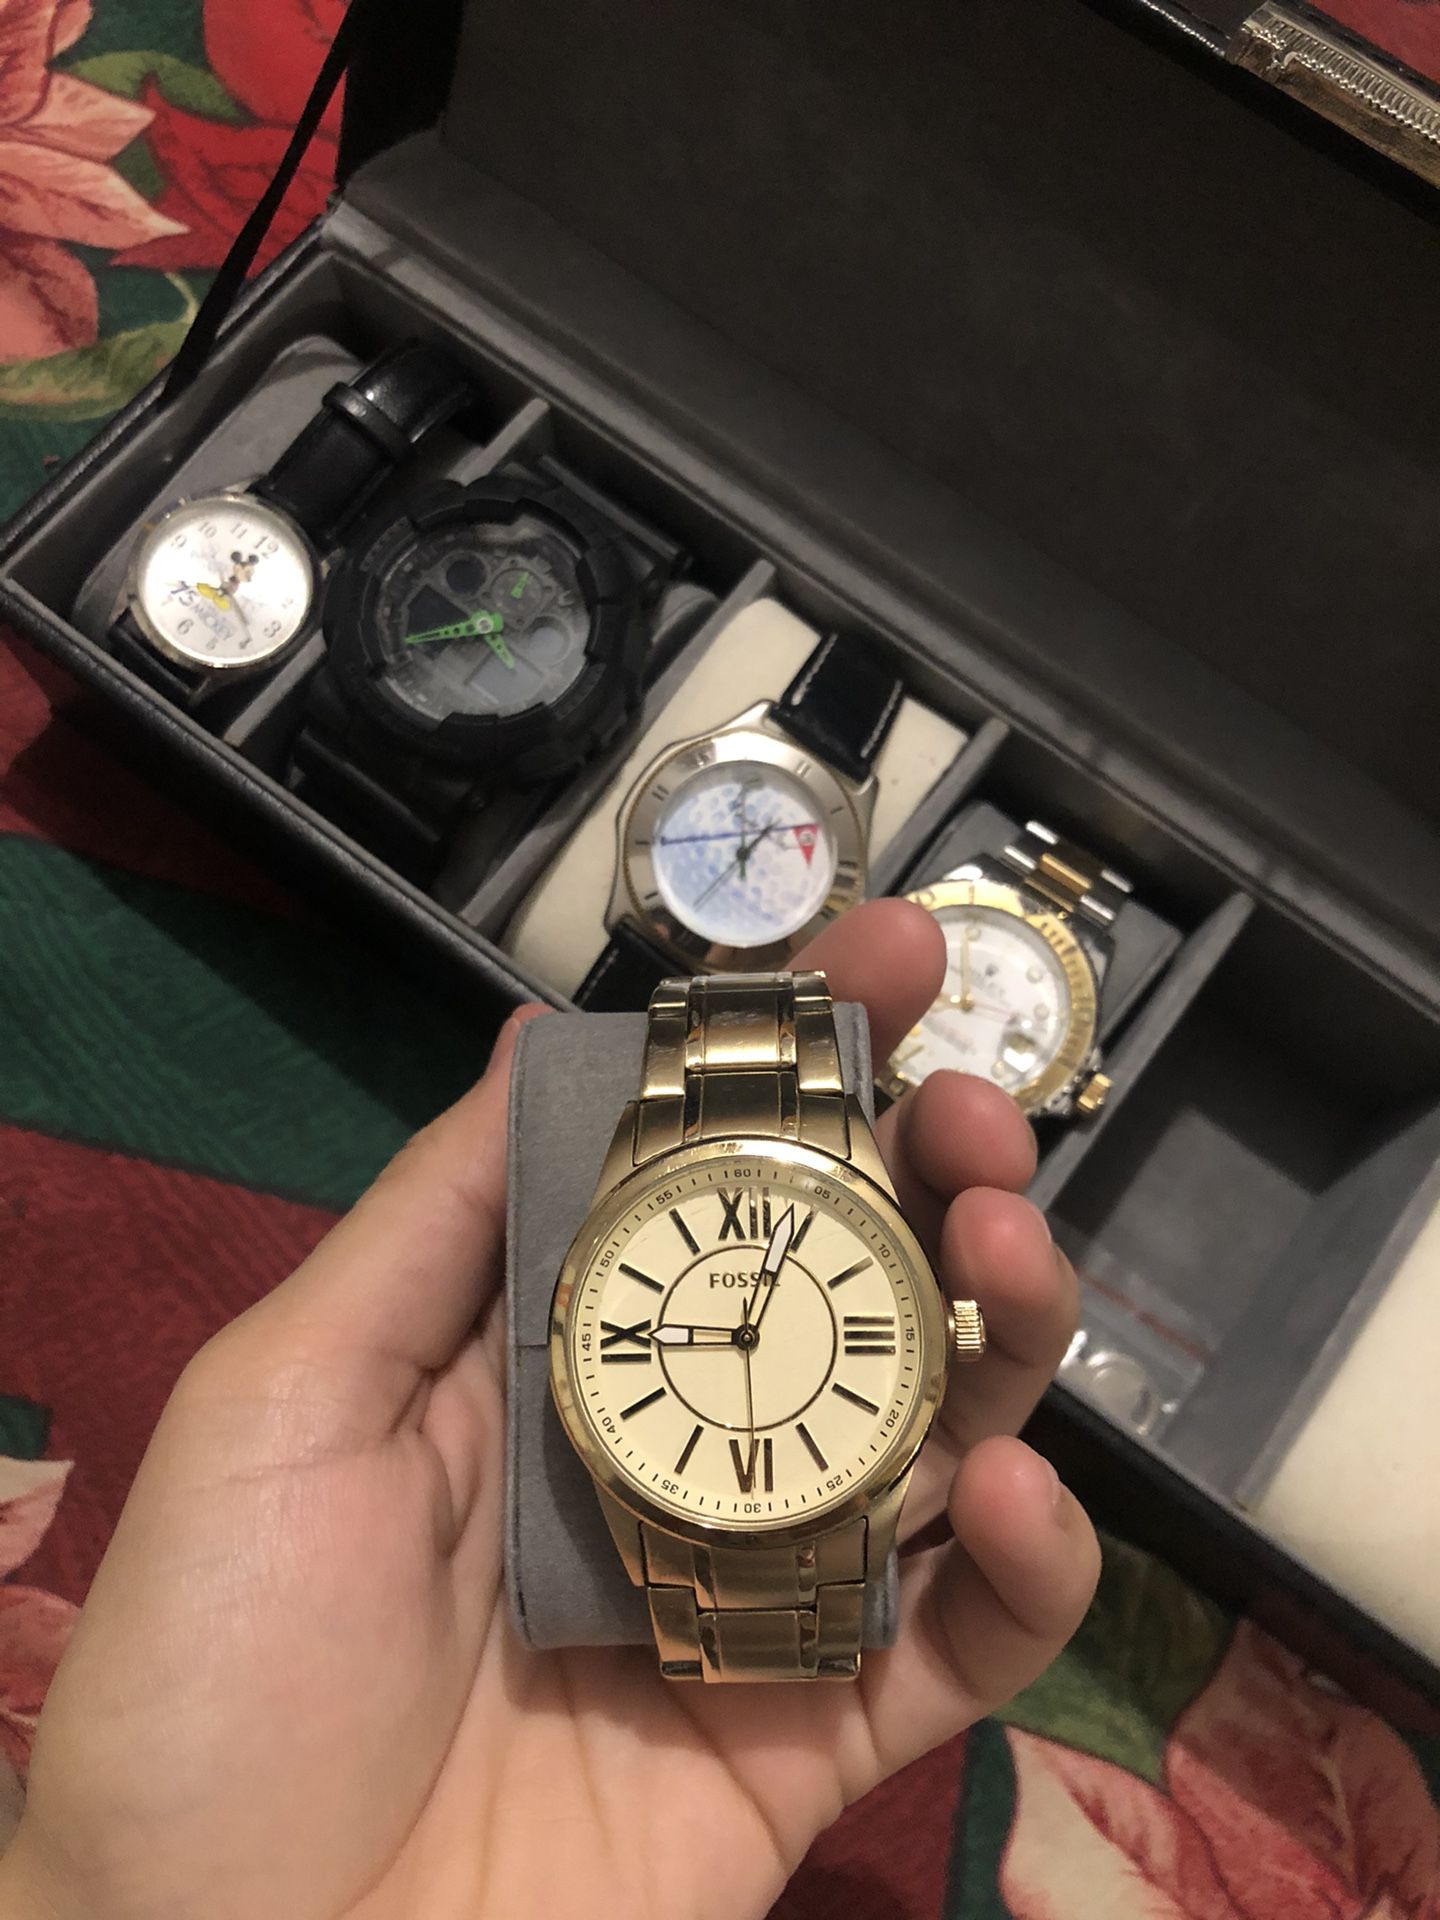 Fossil gold watch